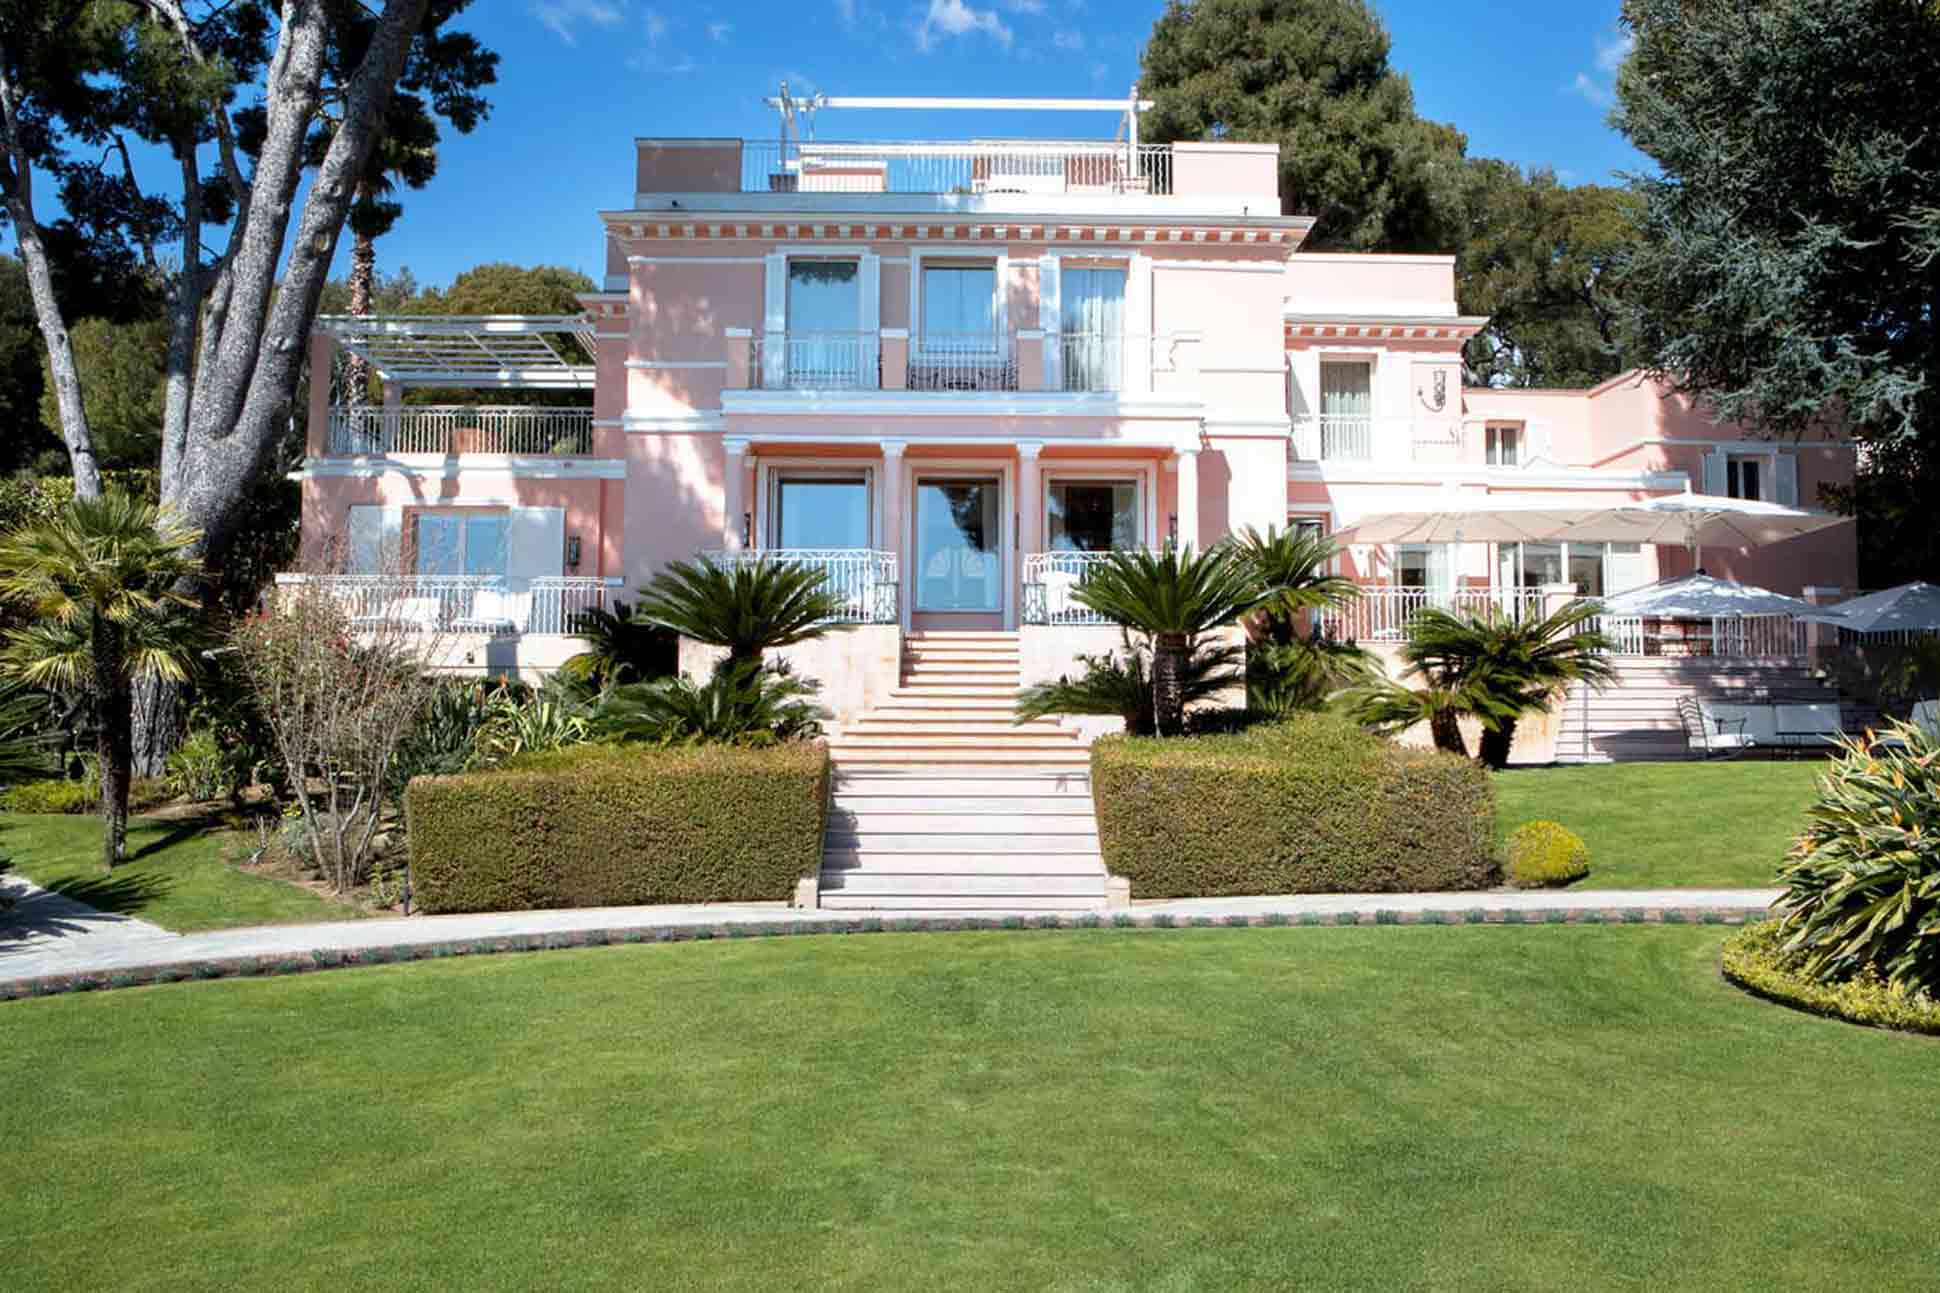 Cap Ferrat queer history: Of Maugham and men | OutThere magazine